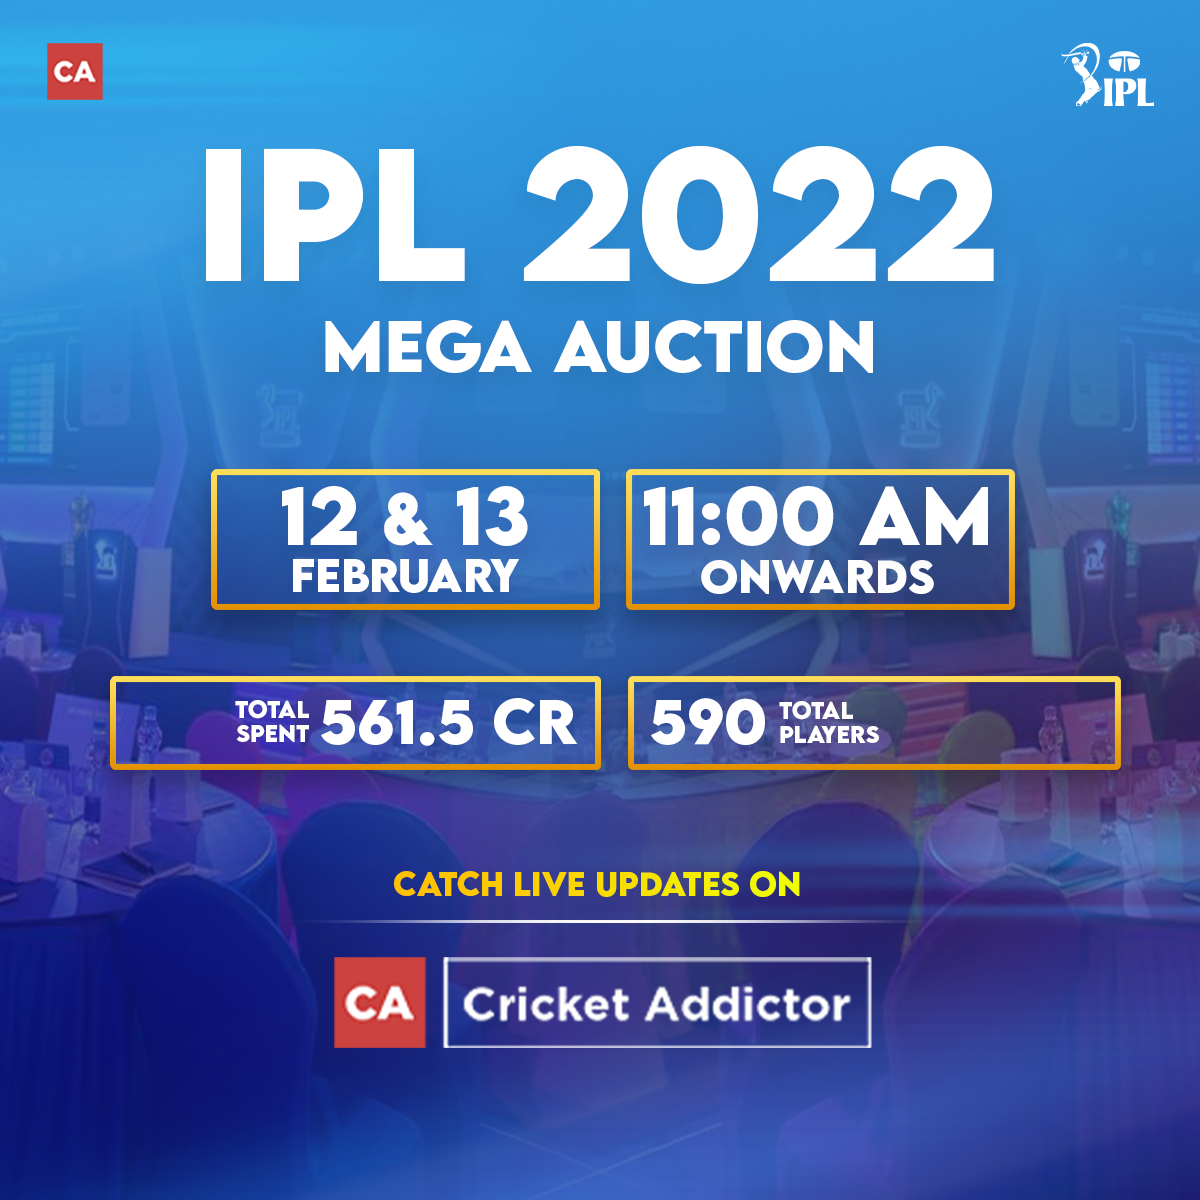 CricTracker India - Here are the remaining purse amounts for each team  leading up to the IPL 2024 auction. | Facebook